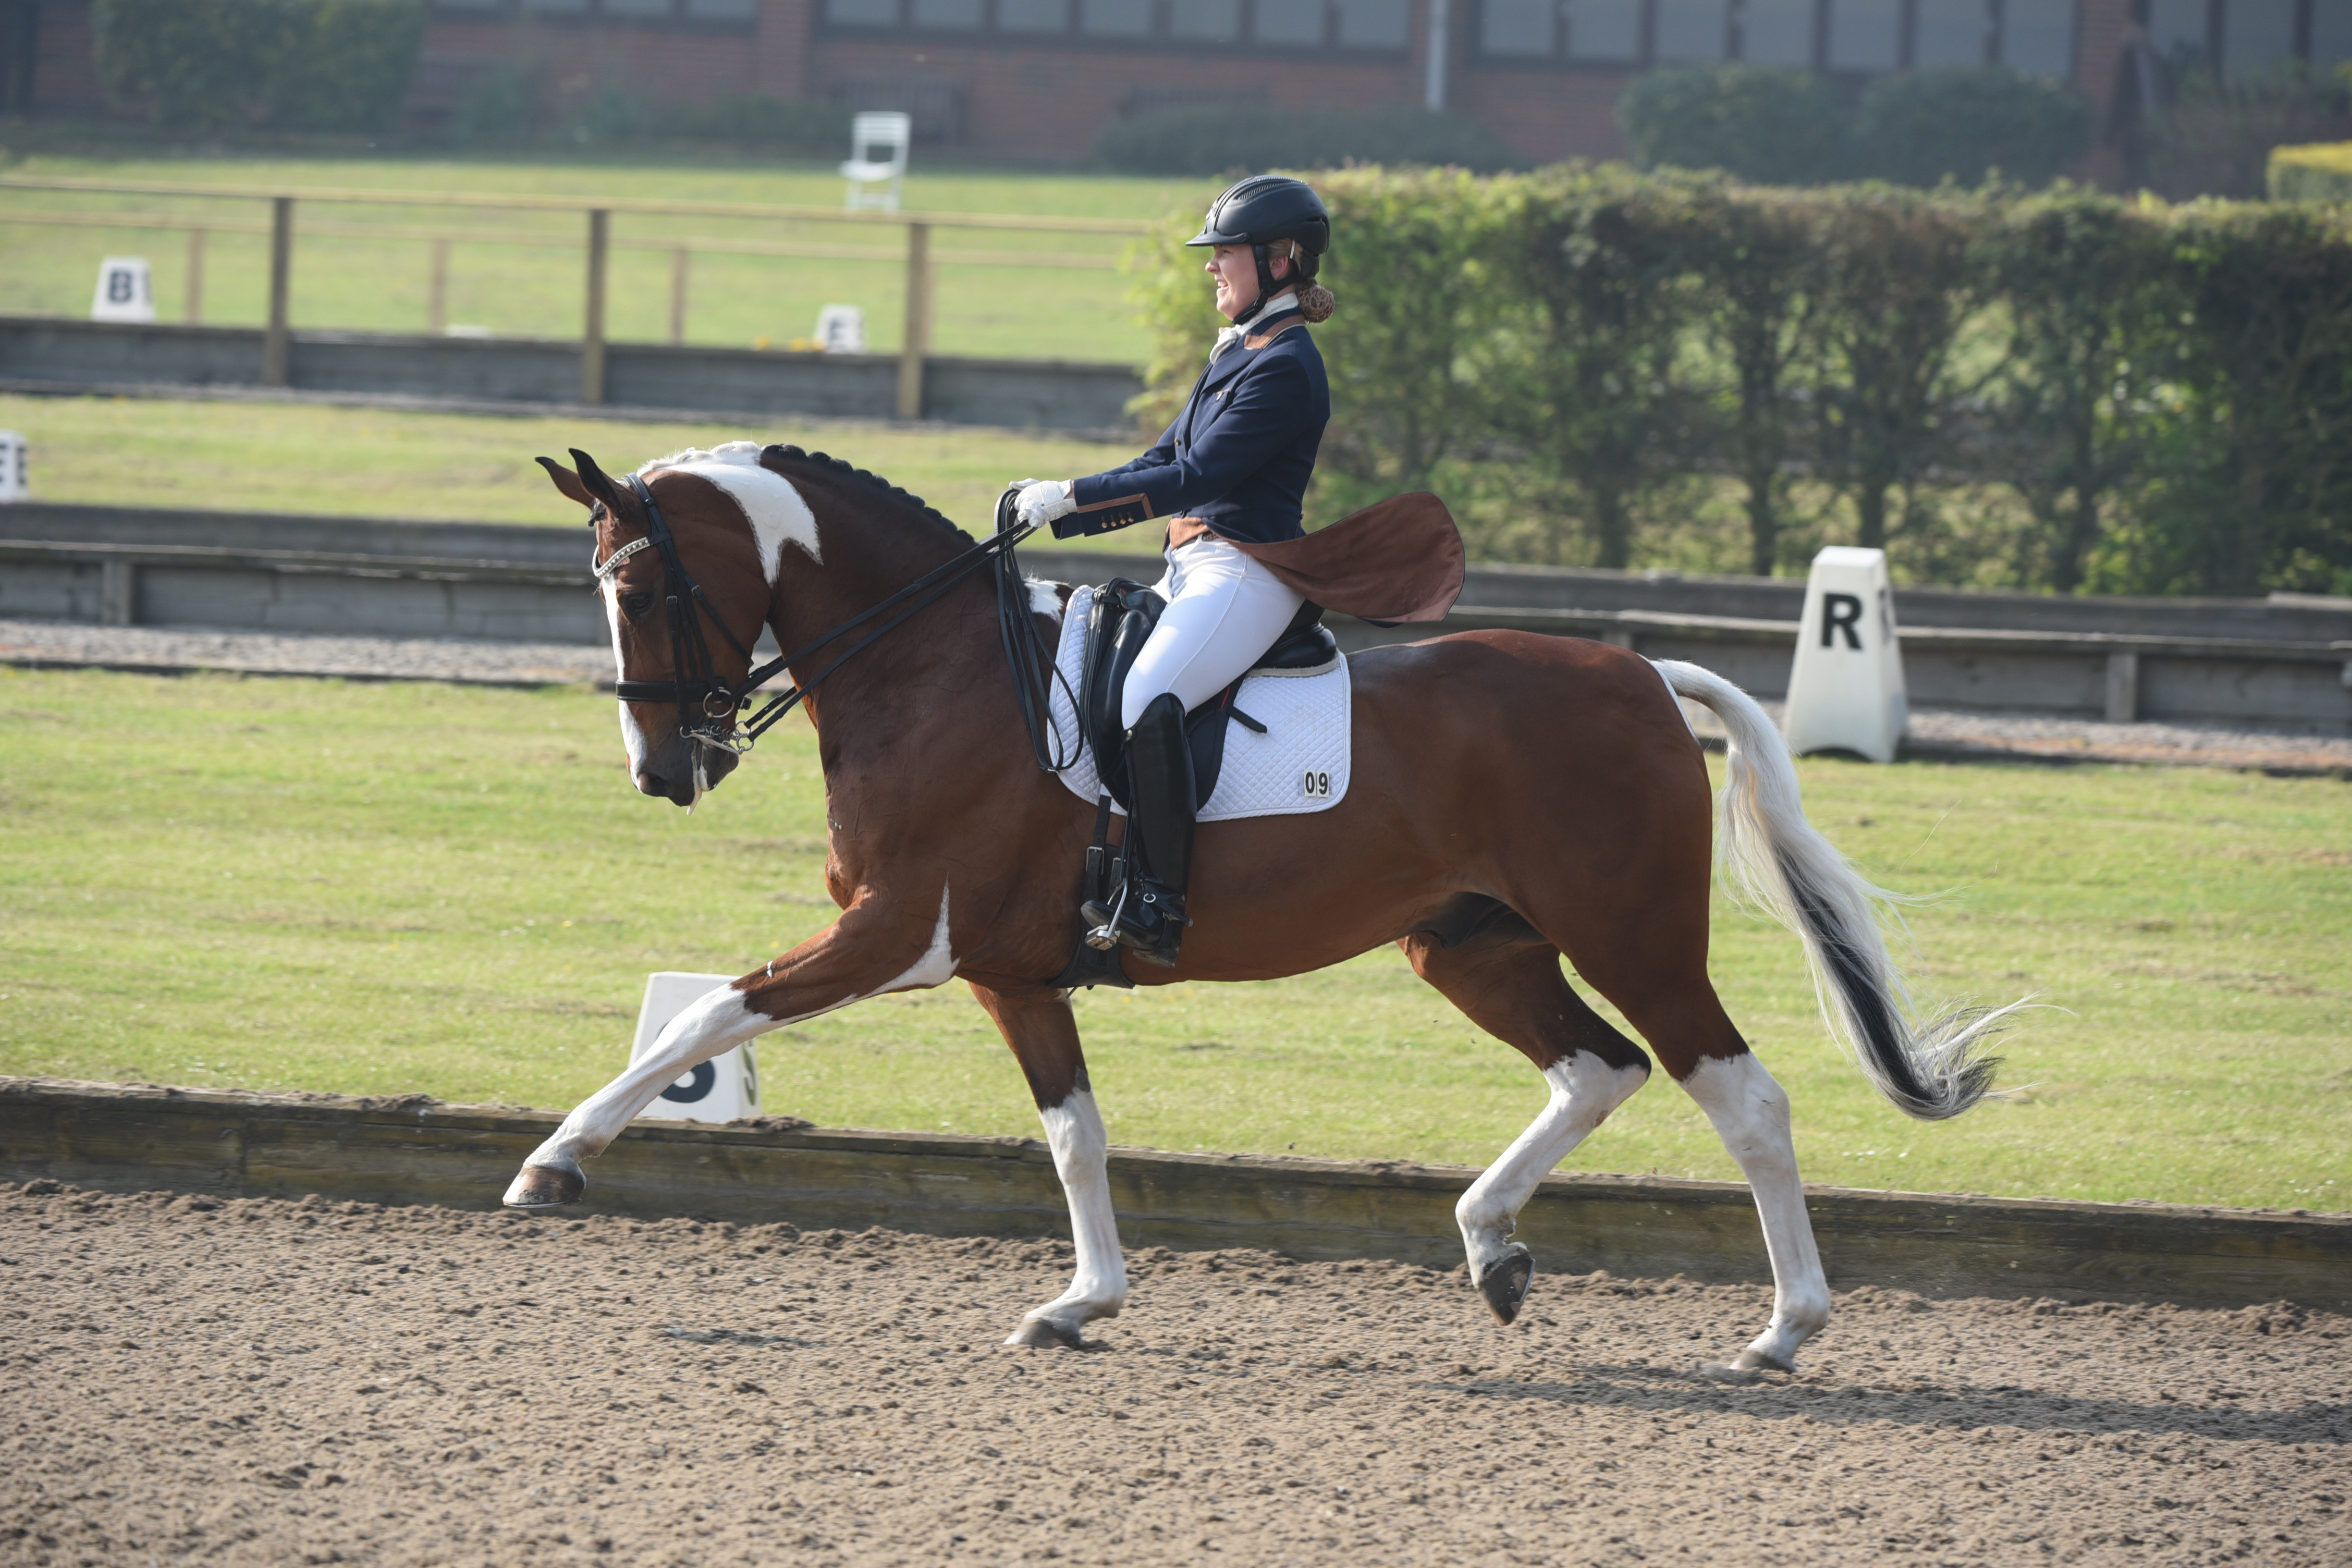 WIN TopSpec sponsorship!! Mr Mercury, Addington Premier League, ridden by Amy Schiessl and owned by Gina Schiessl